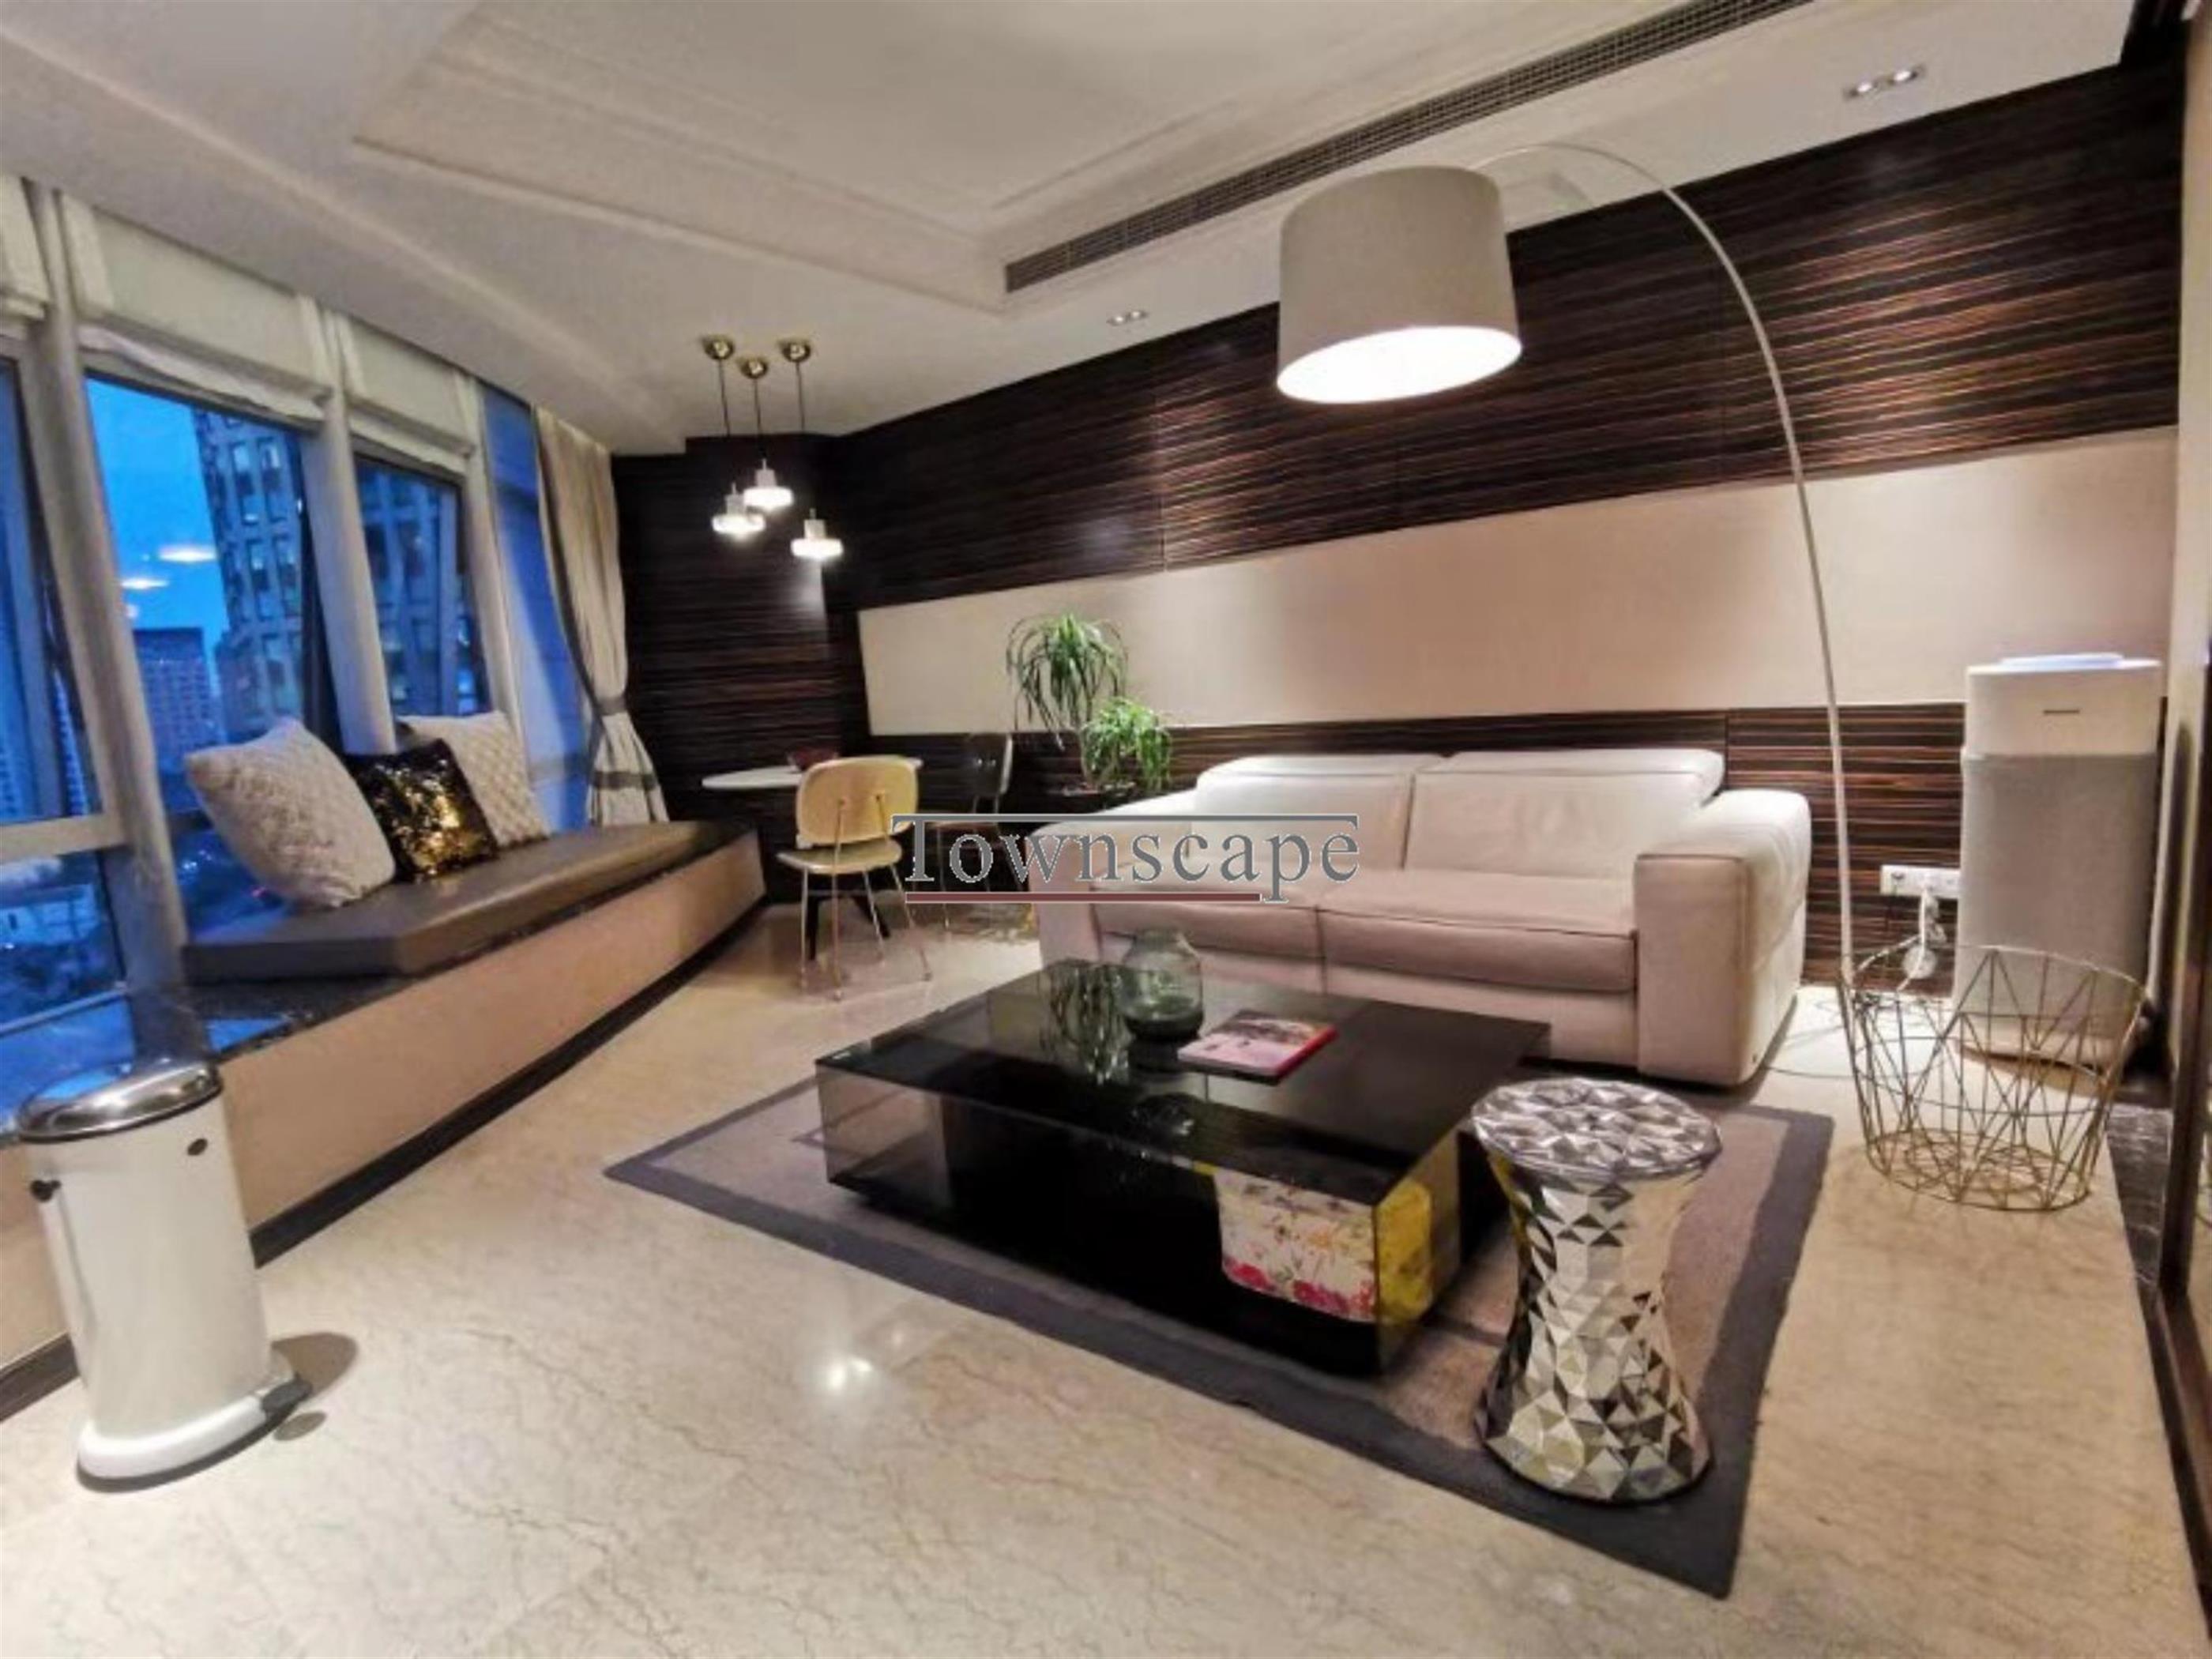 Gorgeous livingroom Spectacular Chic Modern Spacious 2BR West Nanjing Rd Apt for Rent in Shanghai